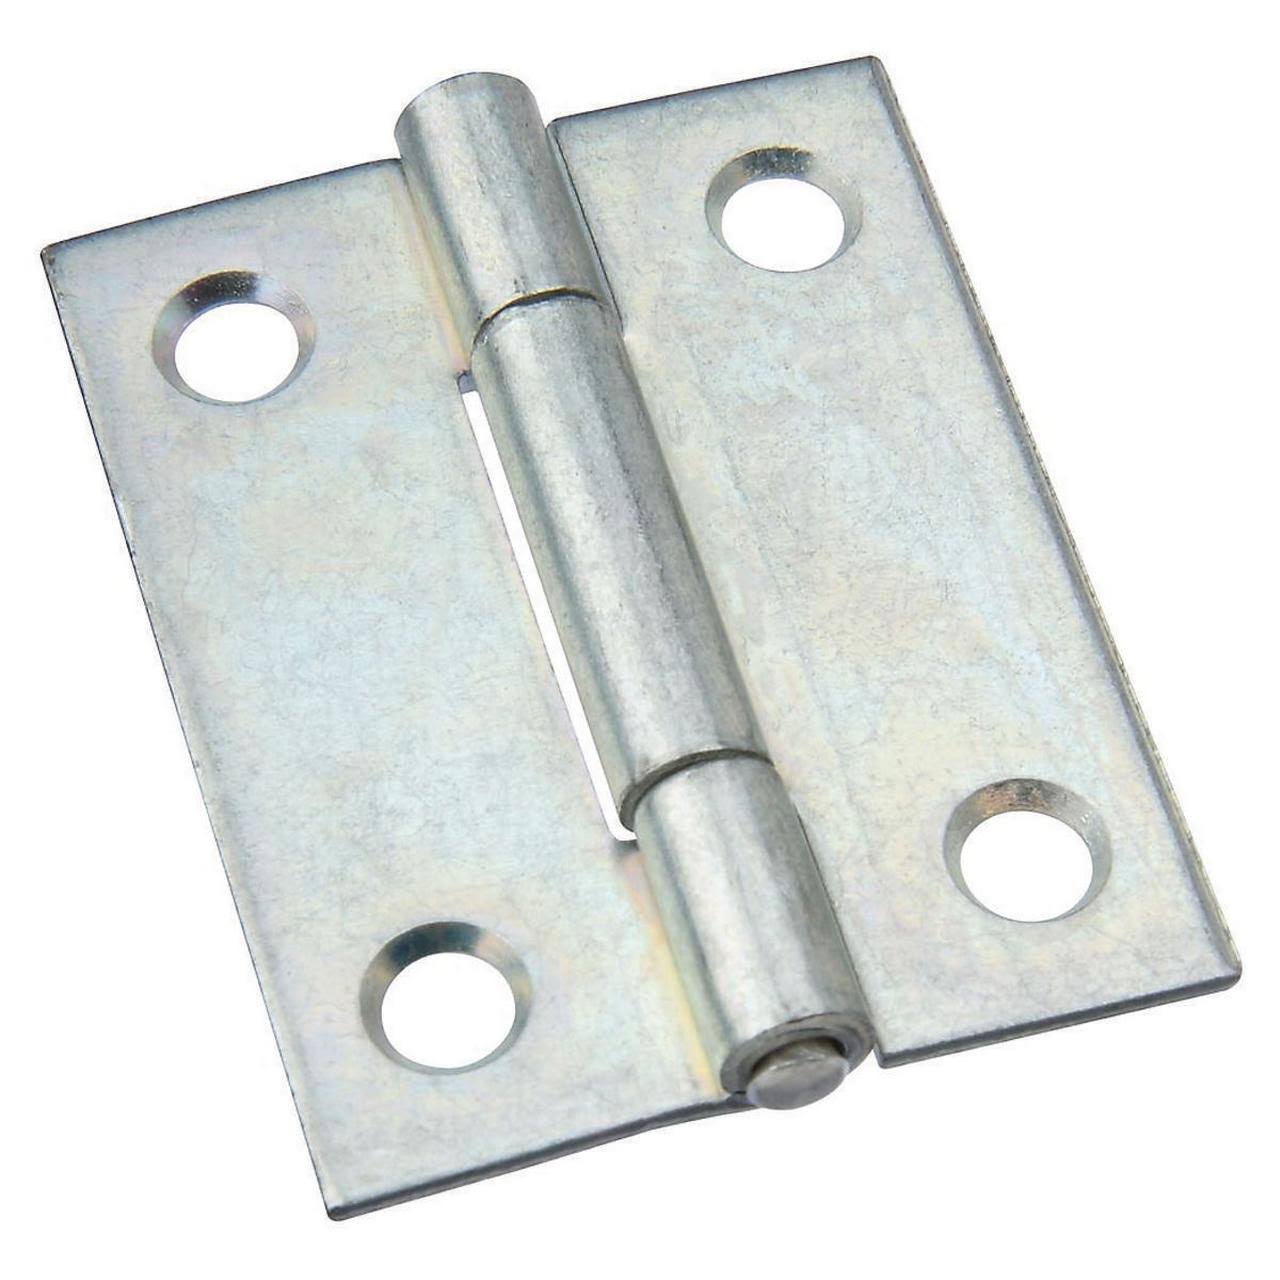 National Hardware N146-142 Non-Removable Pin Hinge - Zinc Plated, 2"